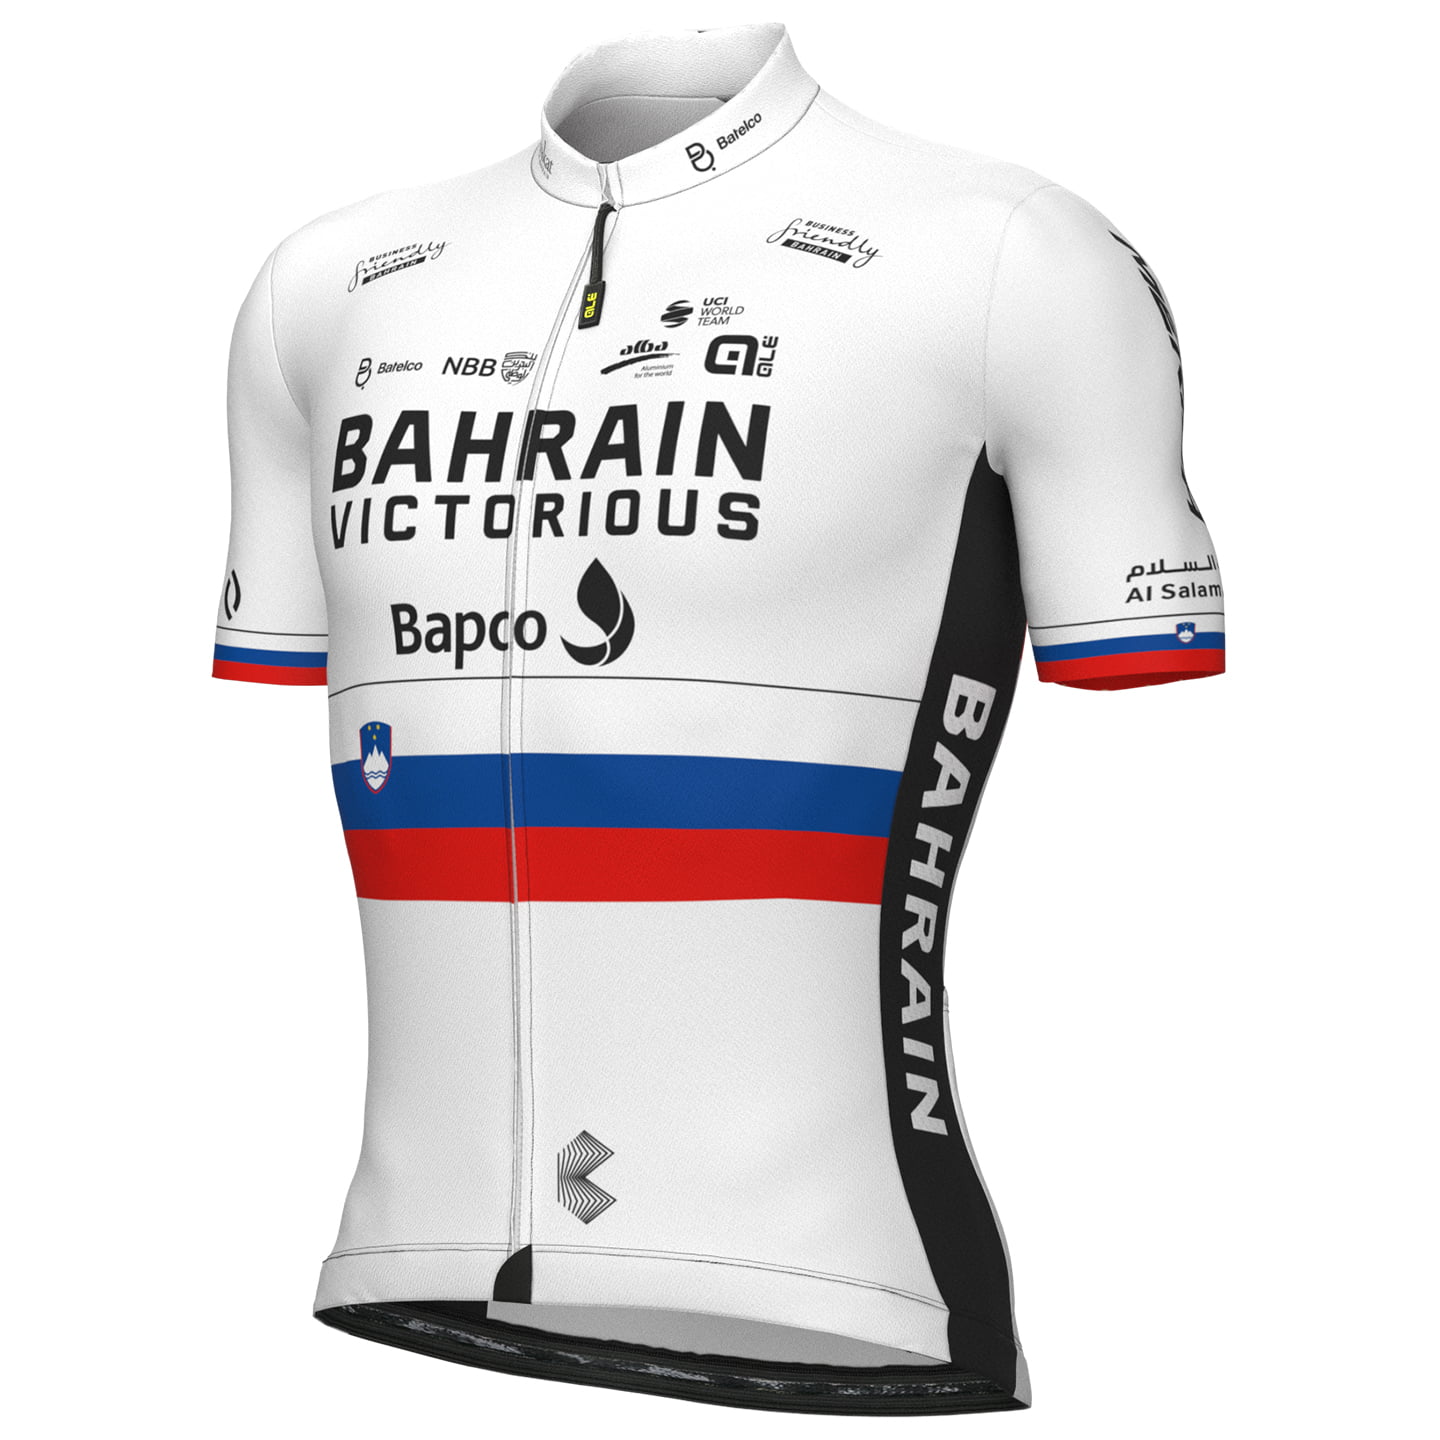 BAHRAIN - VICTORIOUS Short Sleeve Jersey Slovenian Champion 2022, for men, size L, Cycling shirt, Cycle clothing